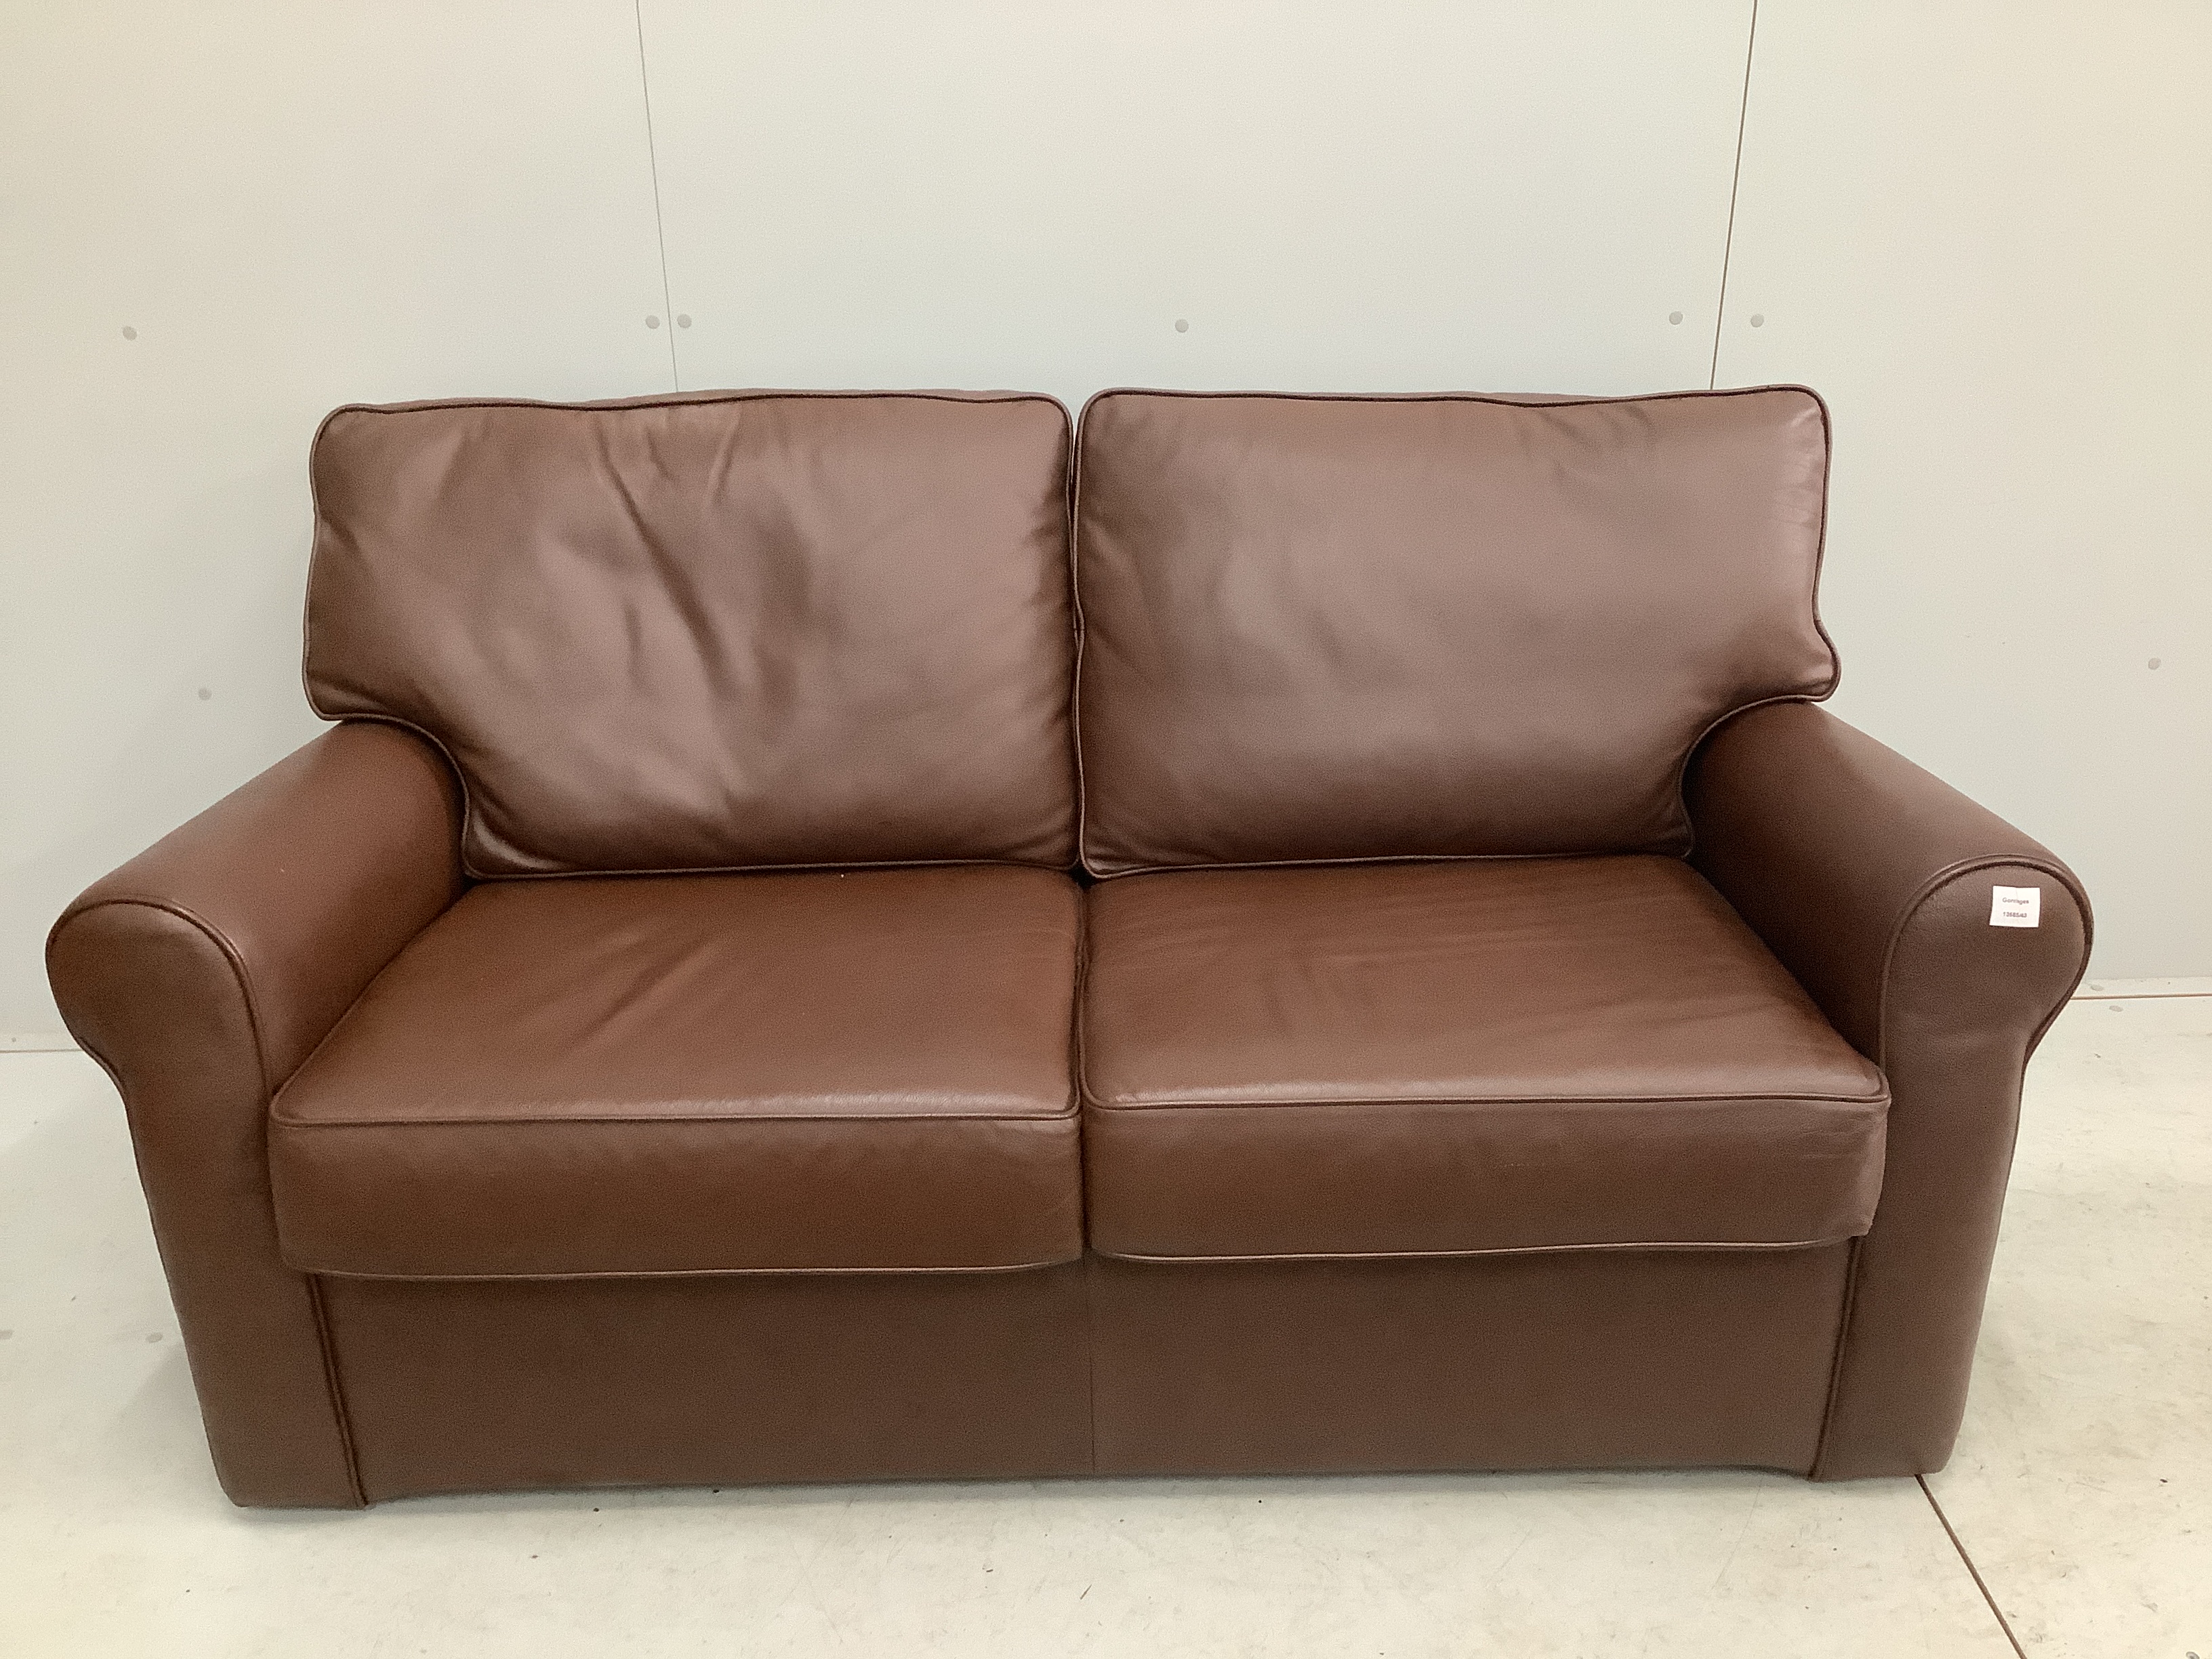 A modern brown leather two seater sofa bed, width 160cm, depth 80cm, height 86cm